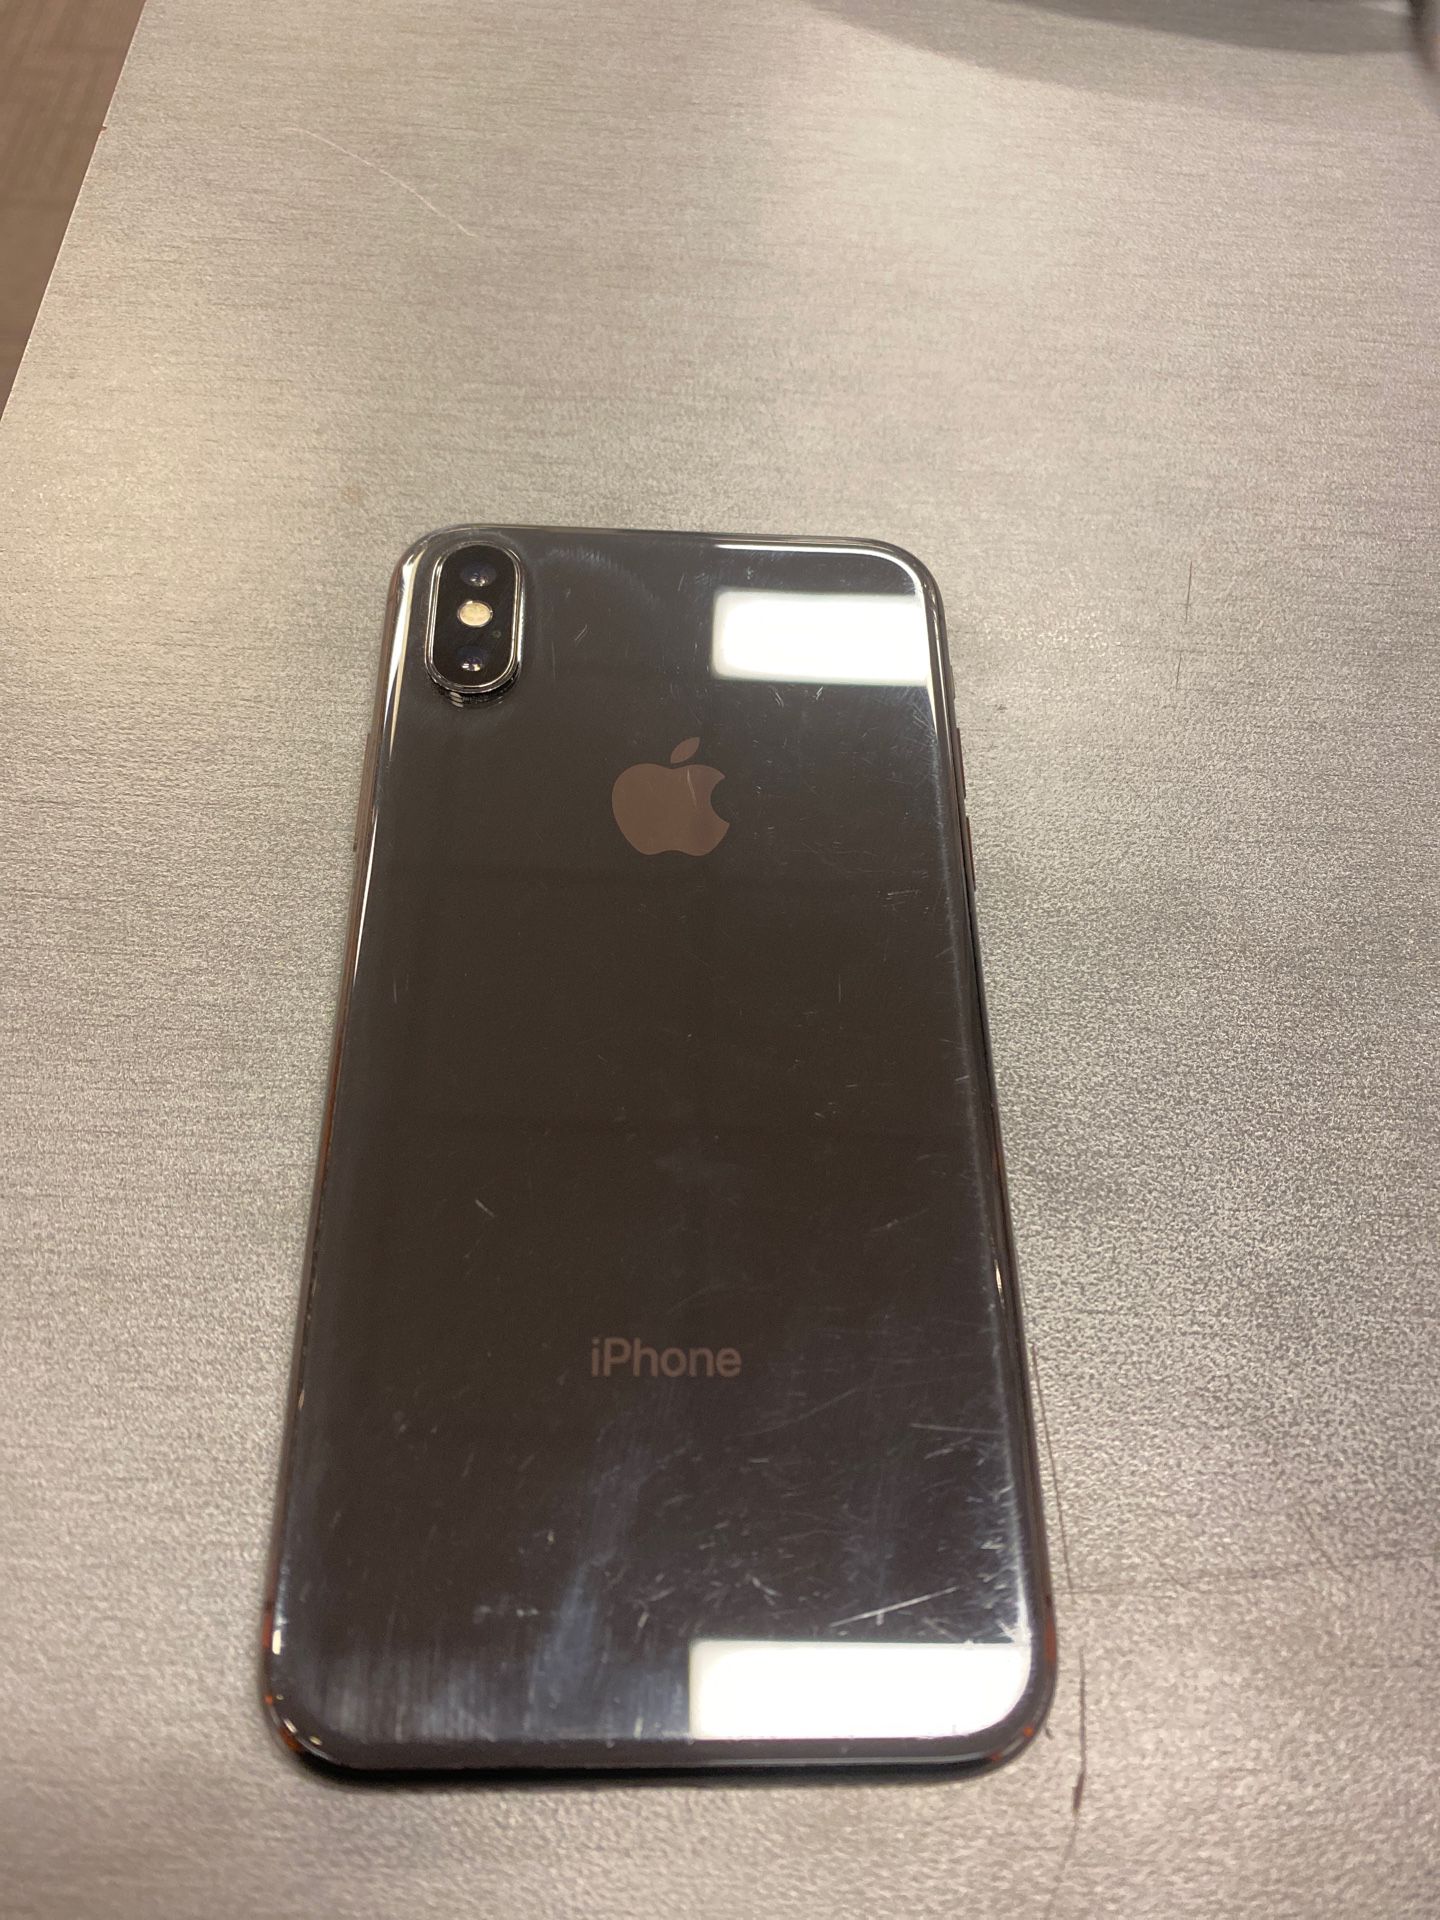 Iphone X 64gb UNLOCKED for any carrier